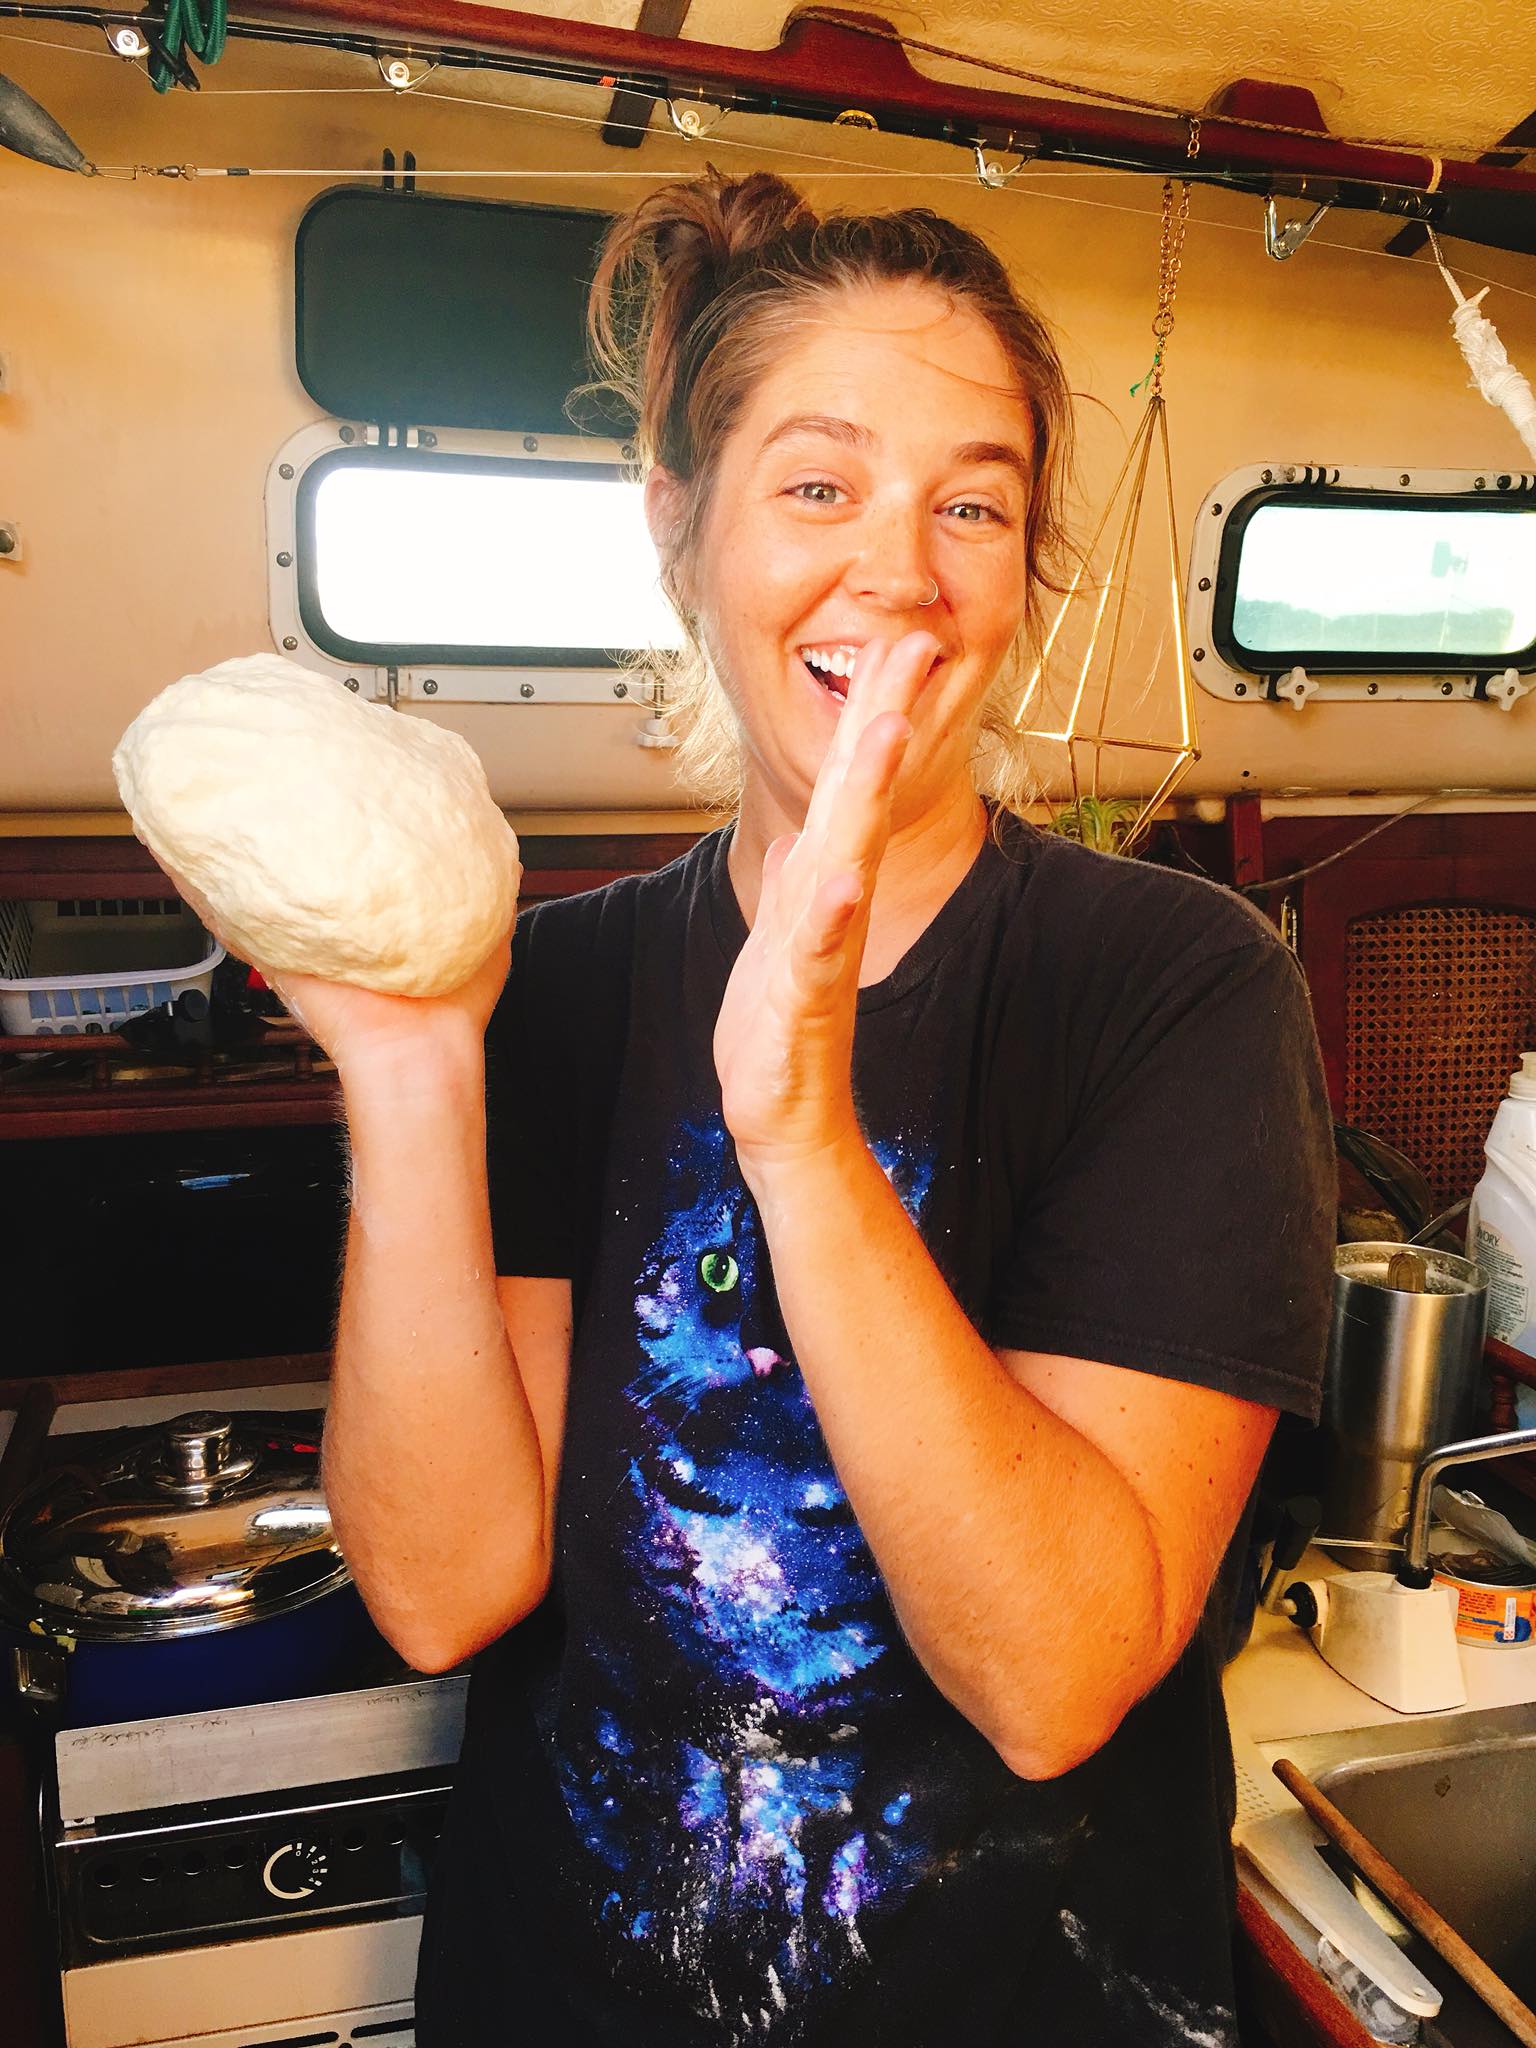 Sailing Life Day 76: Learning how to make homemade bread on the boat! 🤗